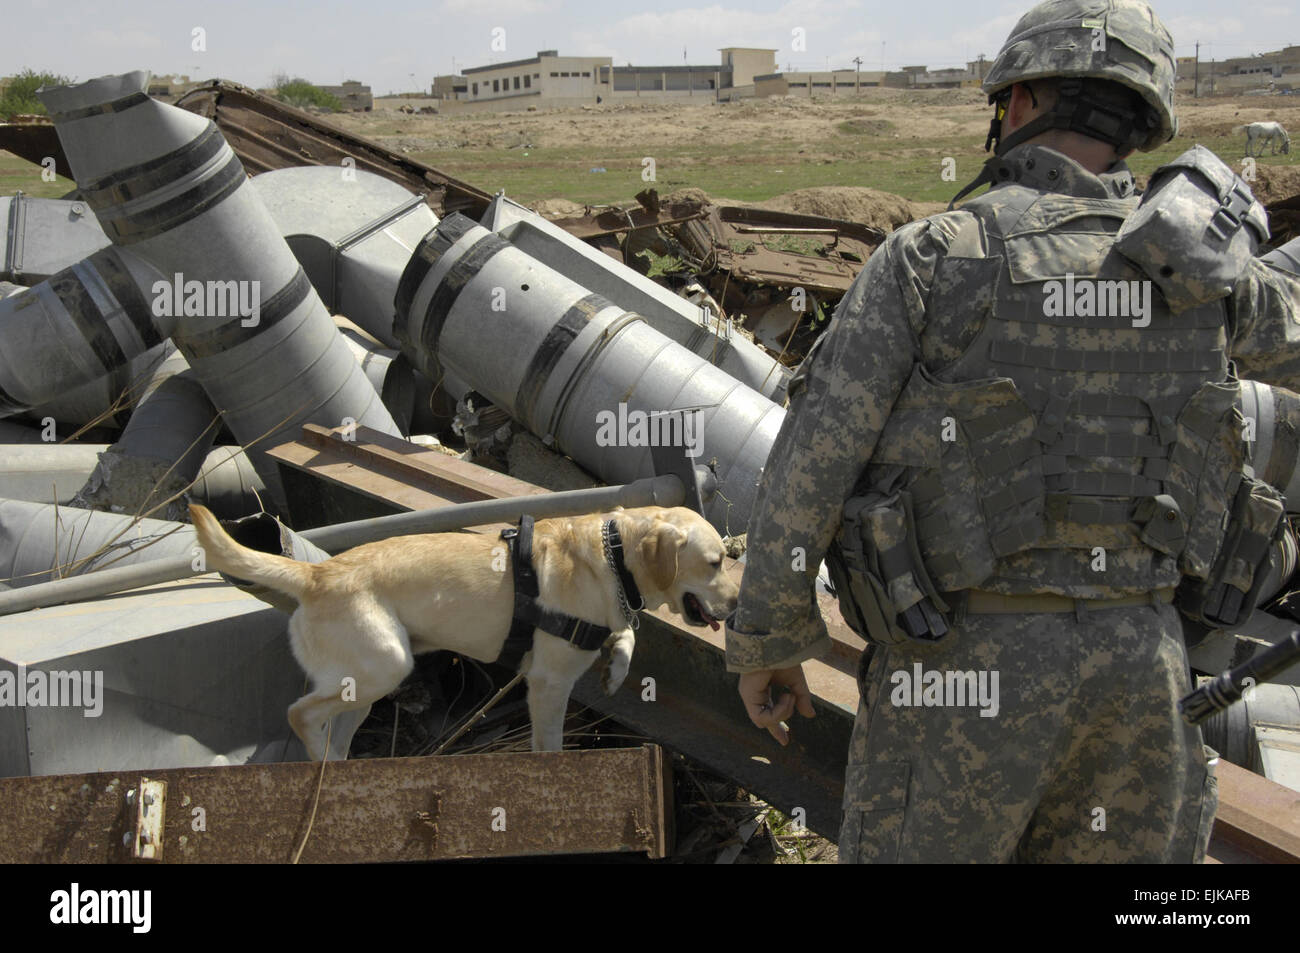 A U.S. Army Soldier and his working dog Lucky conduct a search for explosive devices in an area covered in disposed metal April 2, 2008, in Al Sinaa, Iraq. The canine team is assisting U.S. Soldiers from 1st Battalion, 8th Infantry Regiment, 3rd Brigade Combat Team, 4th Infantry Division.  Pfc. Sarah De Boise Stock Photo